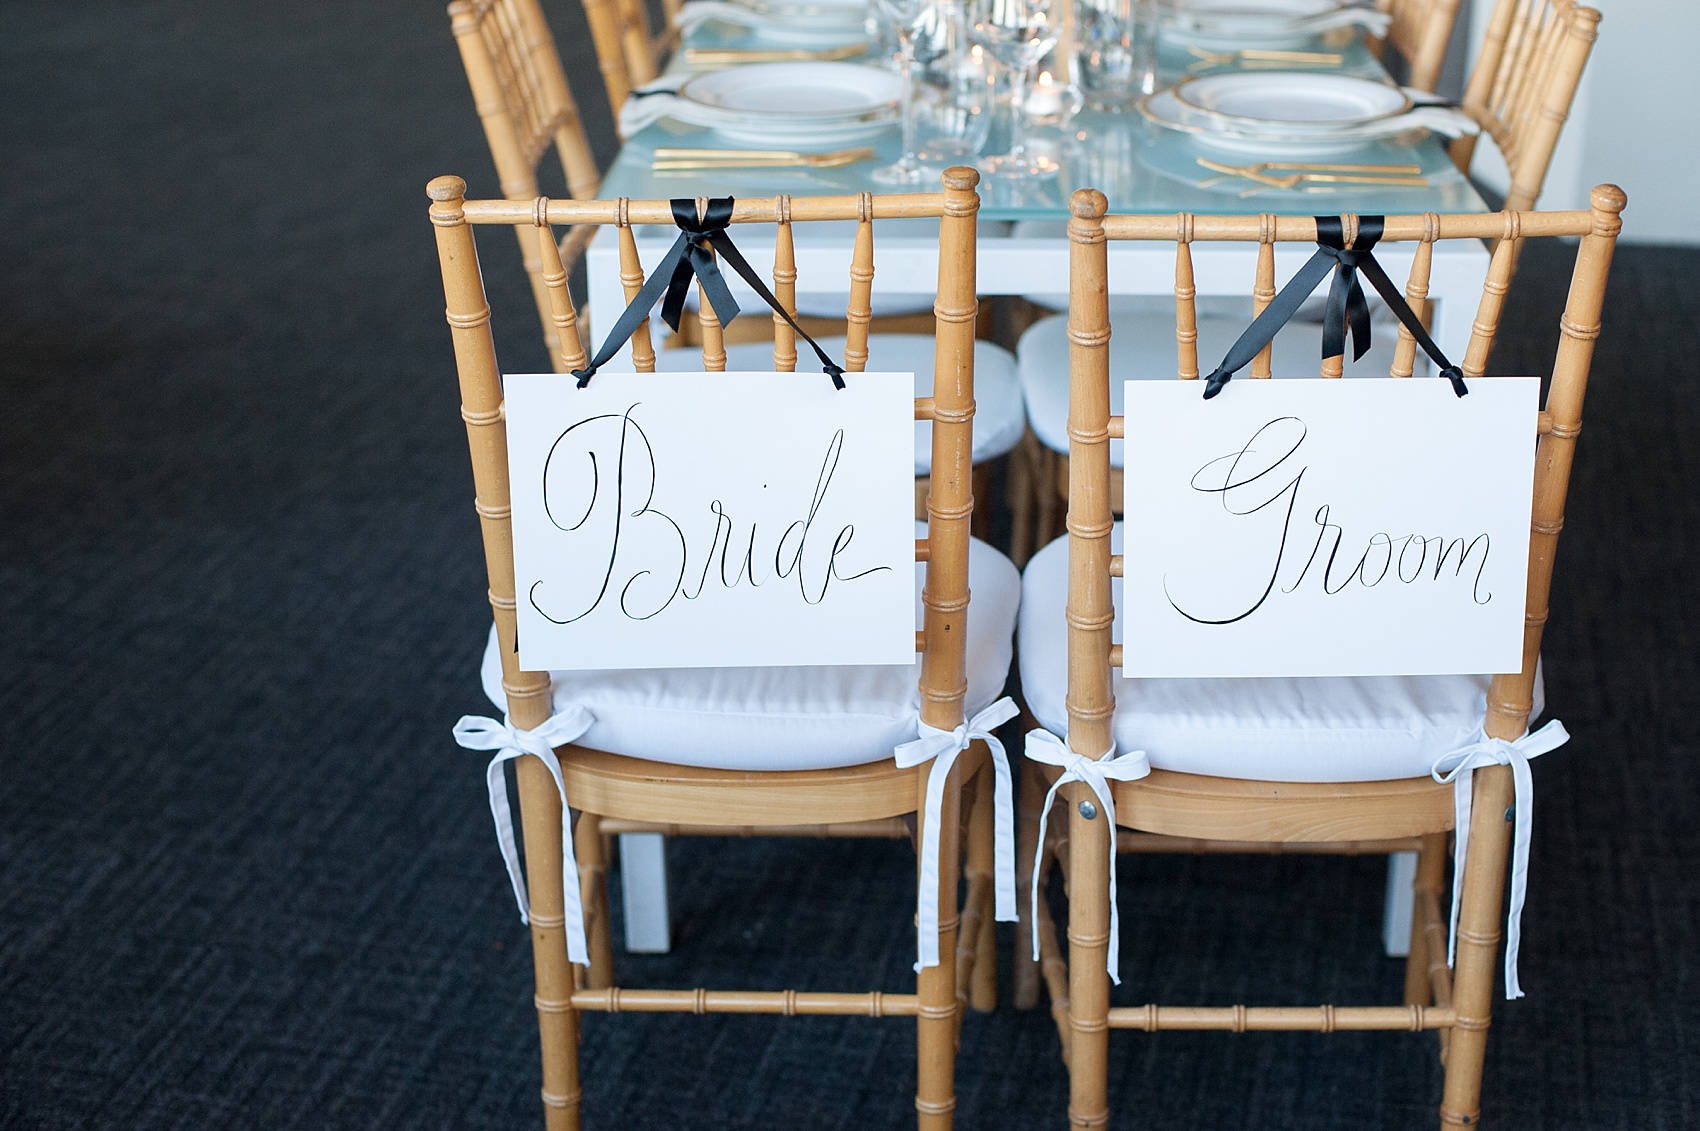 Chair signage from a black and gold wedding inspiration photo shoot in NYC. Photos by Mikkel Paige Photography.